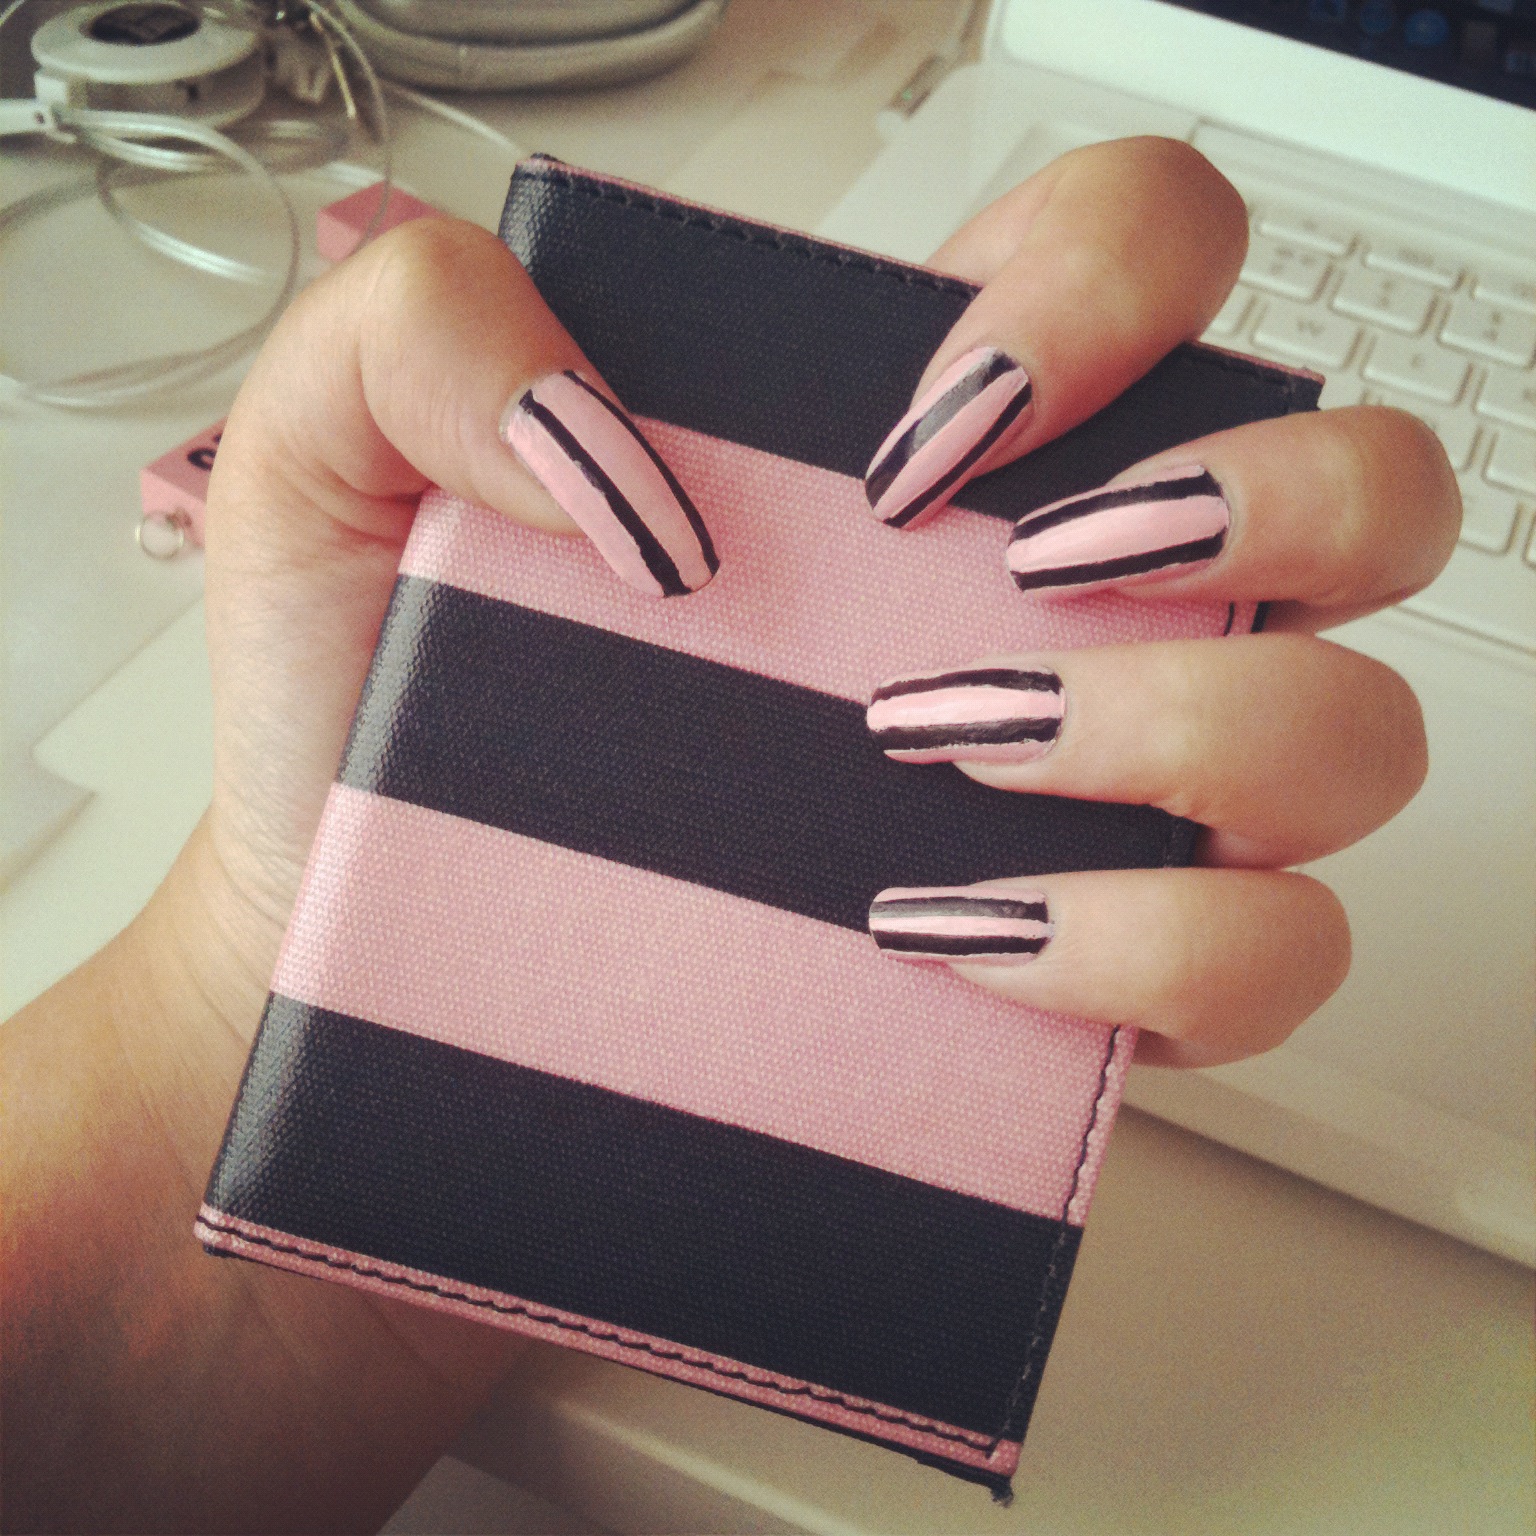 The Queen of Nails: Jack Wills Inspired Stripe Nails